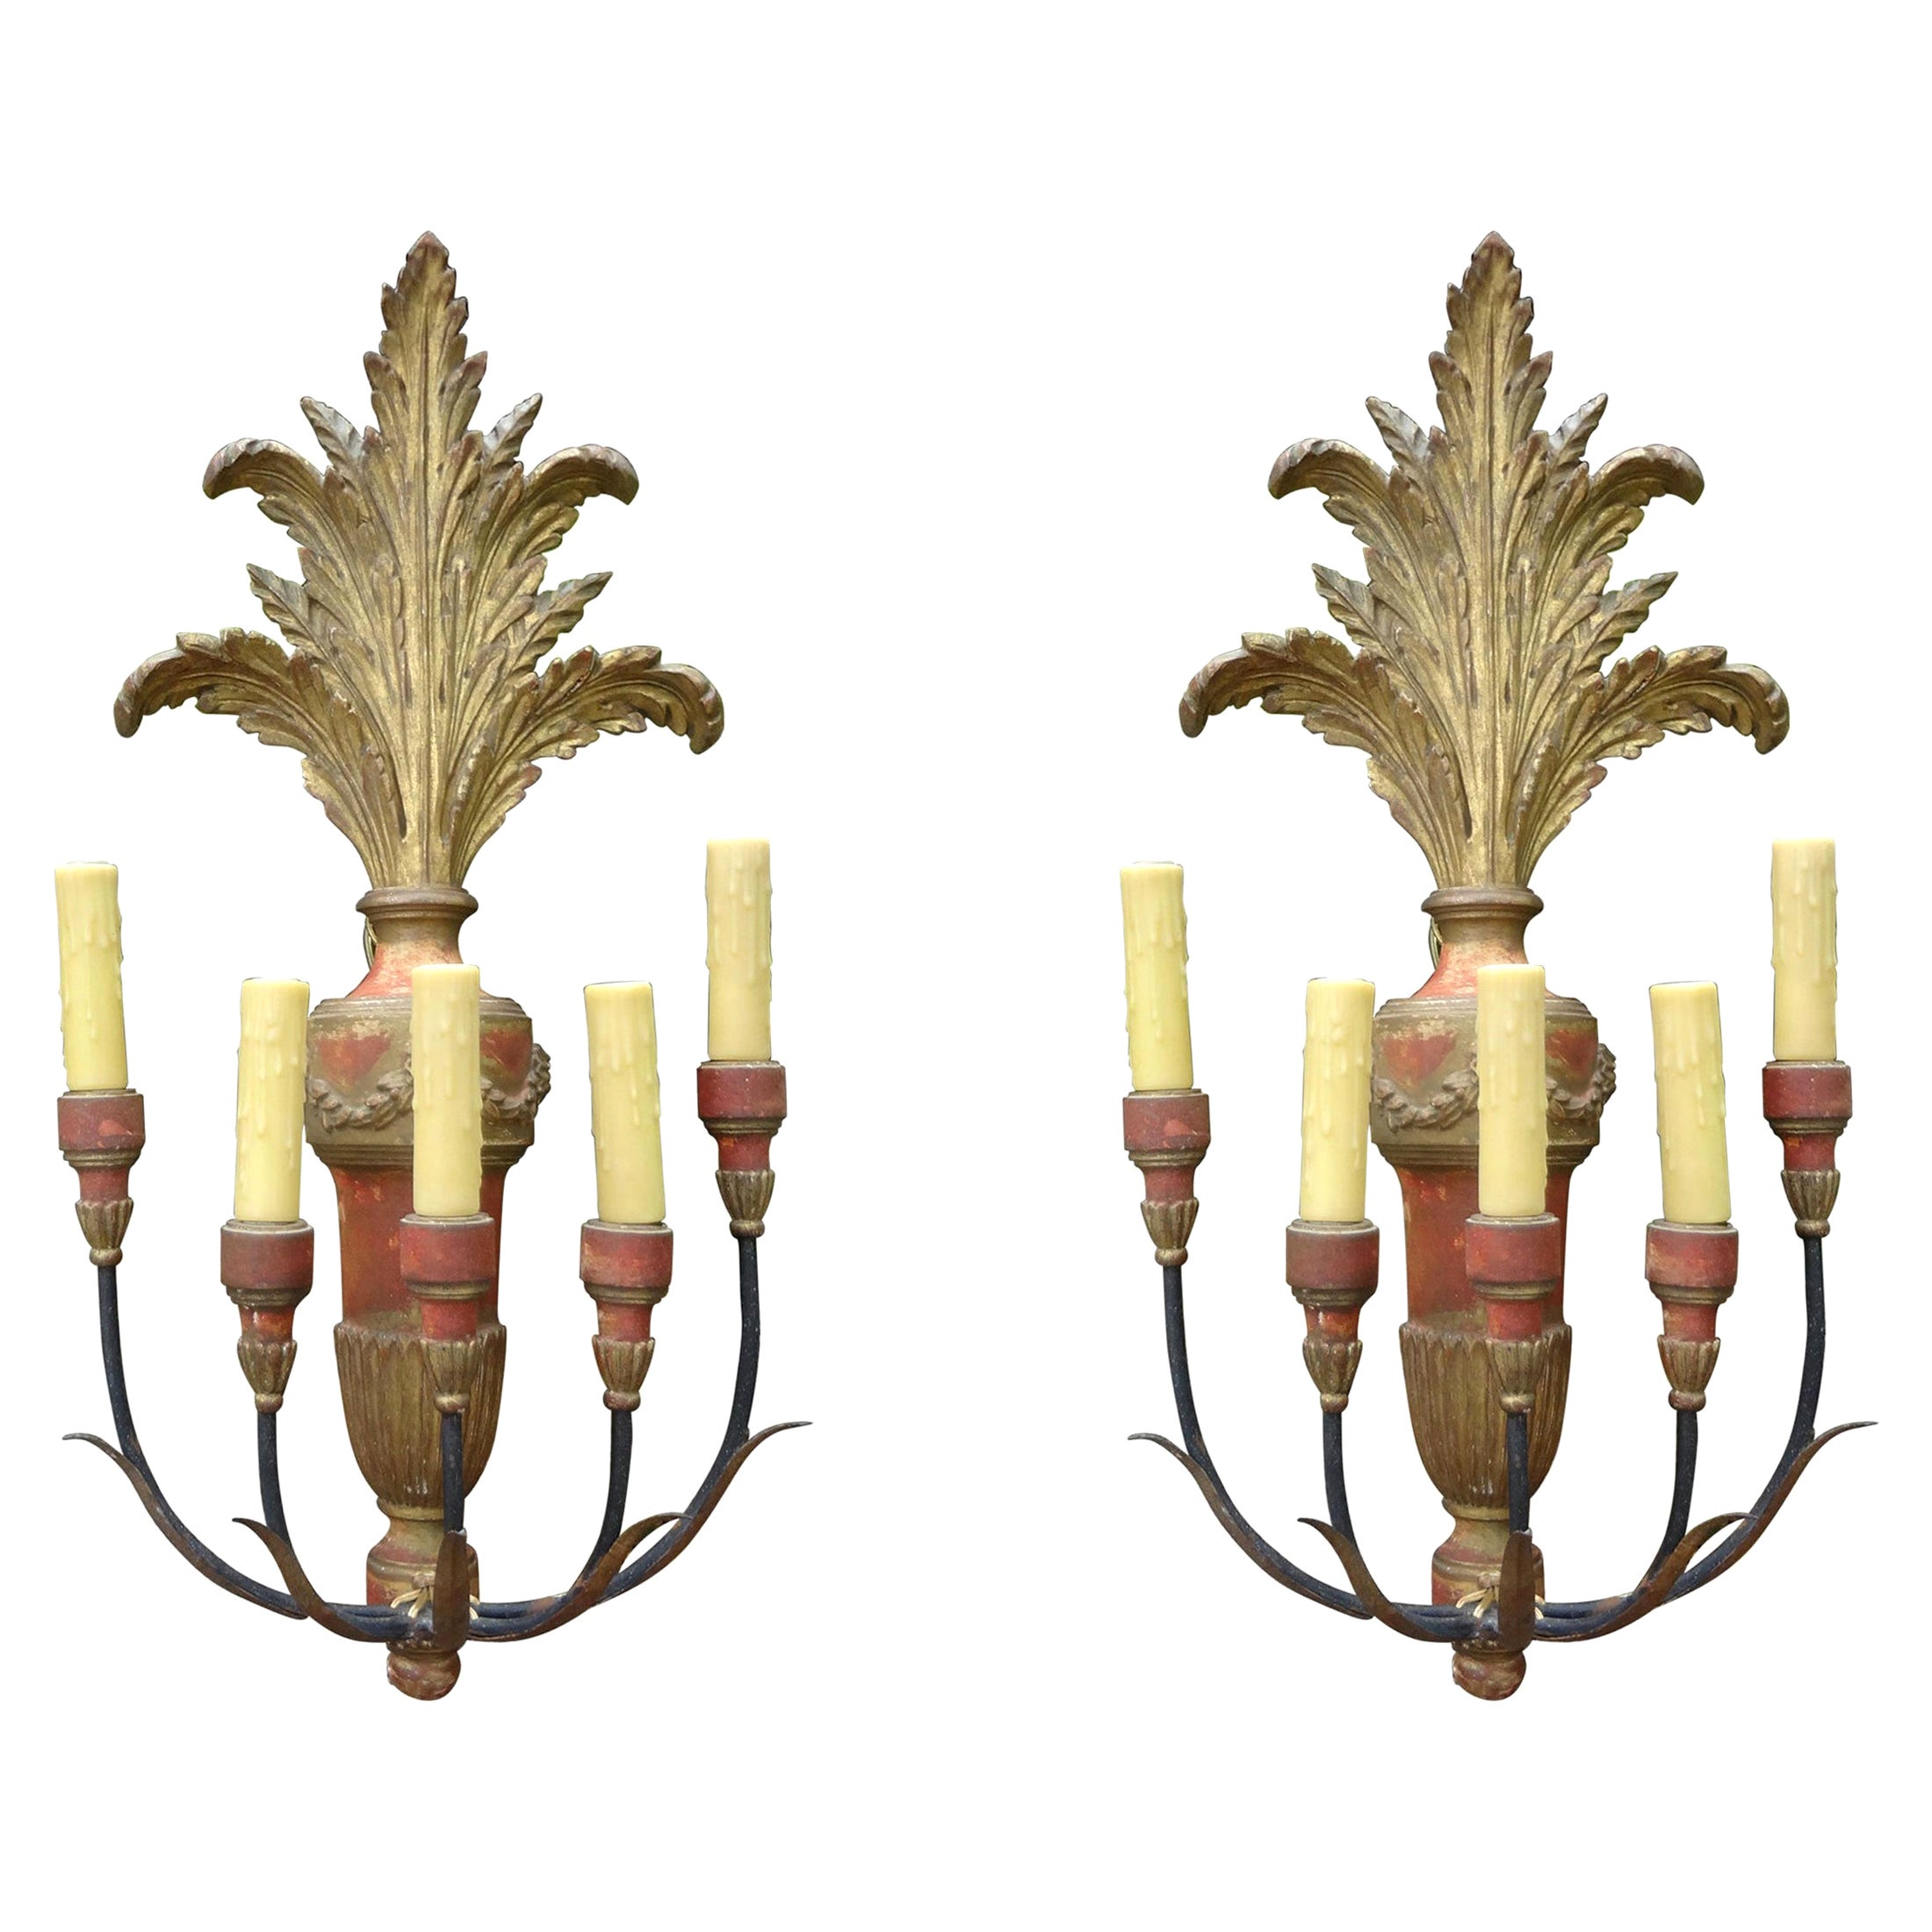 Pair of Italian Painted and Parcel Giltwood Plume Sconces